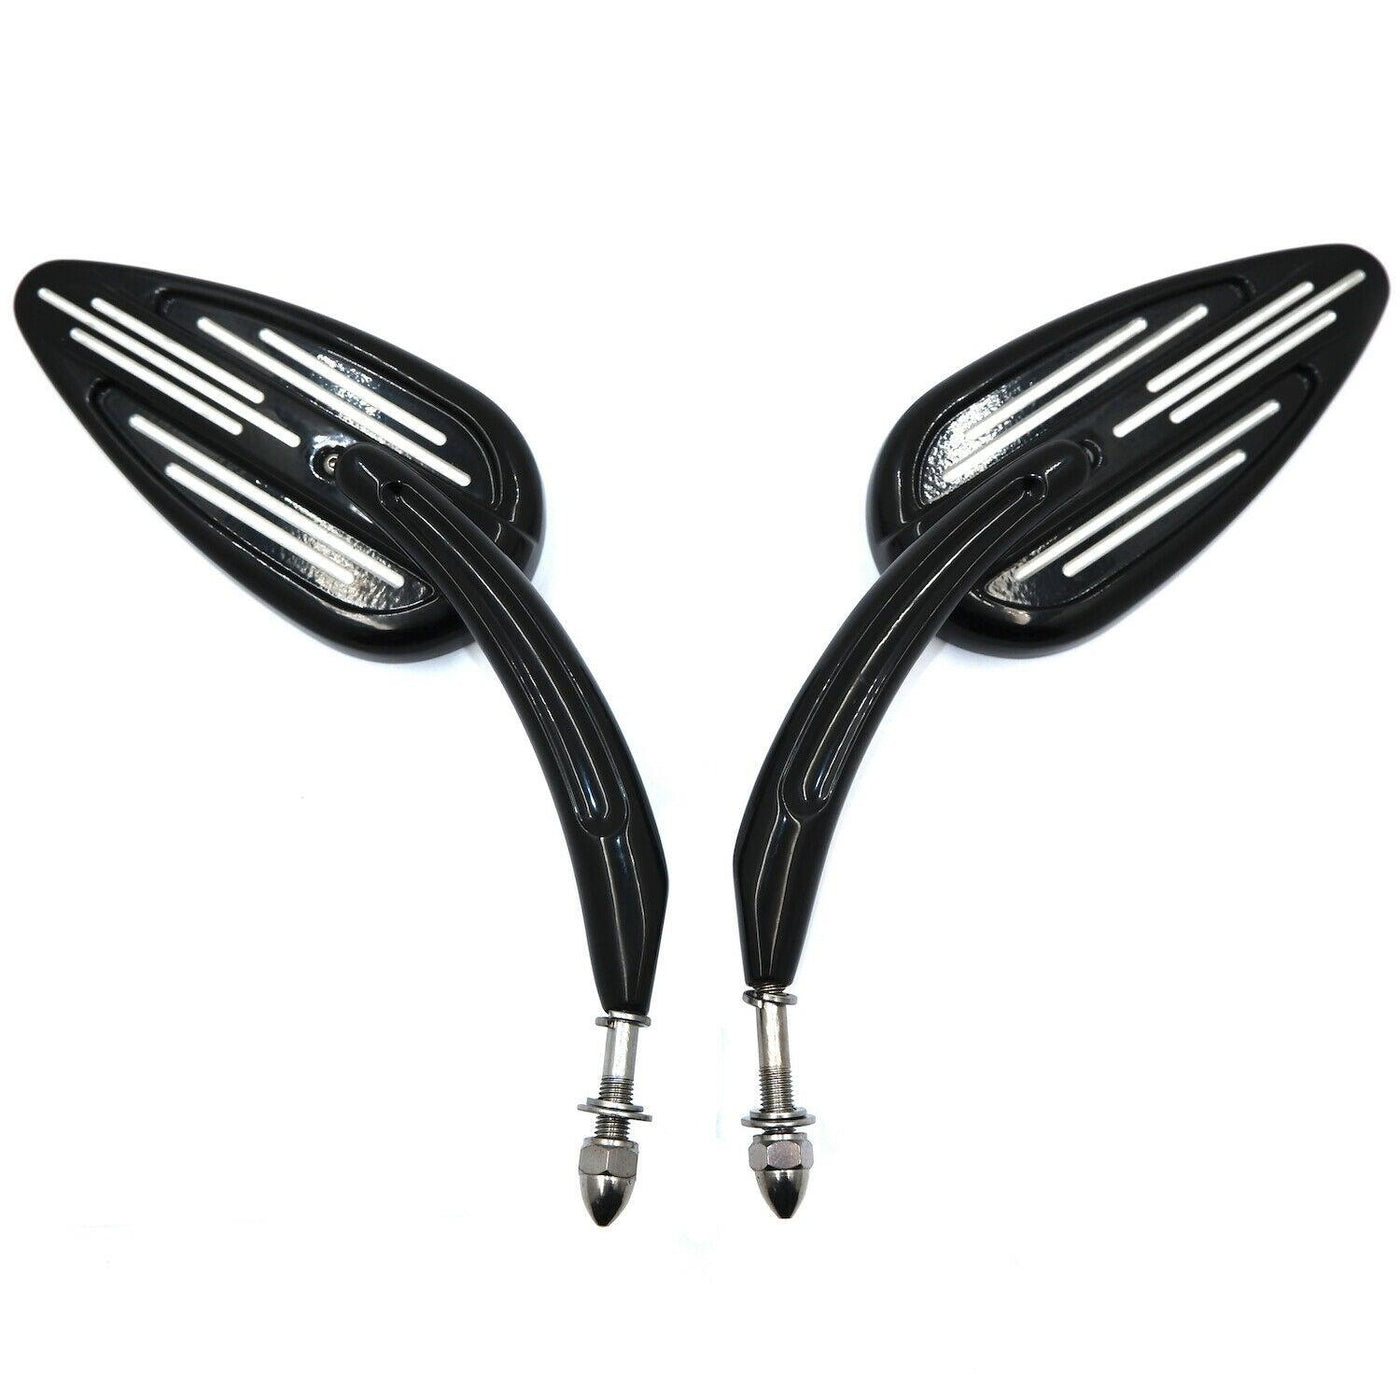 Black Rear View Left&Right Mirrors For Harley 1982-later all models - Moto Life Products